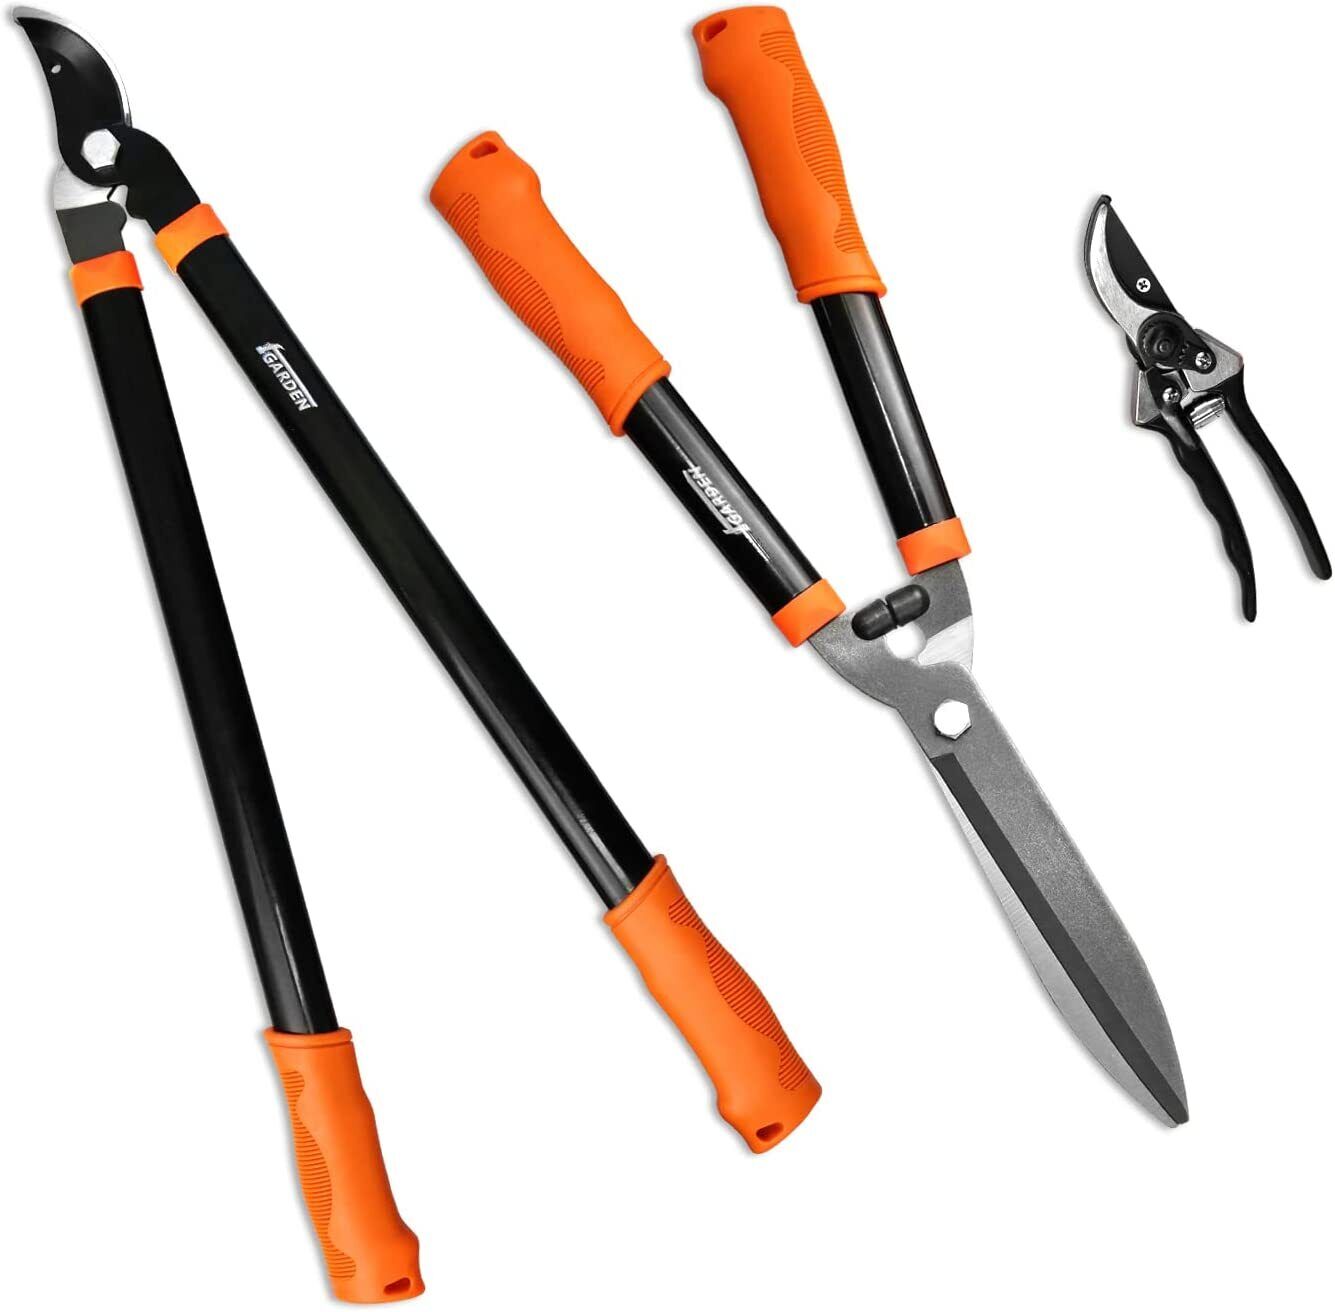 3 Piece Combo Garden Tool Set With Lopper, Hedge Shears And Pruner Shears,